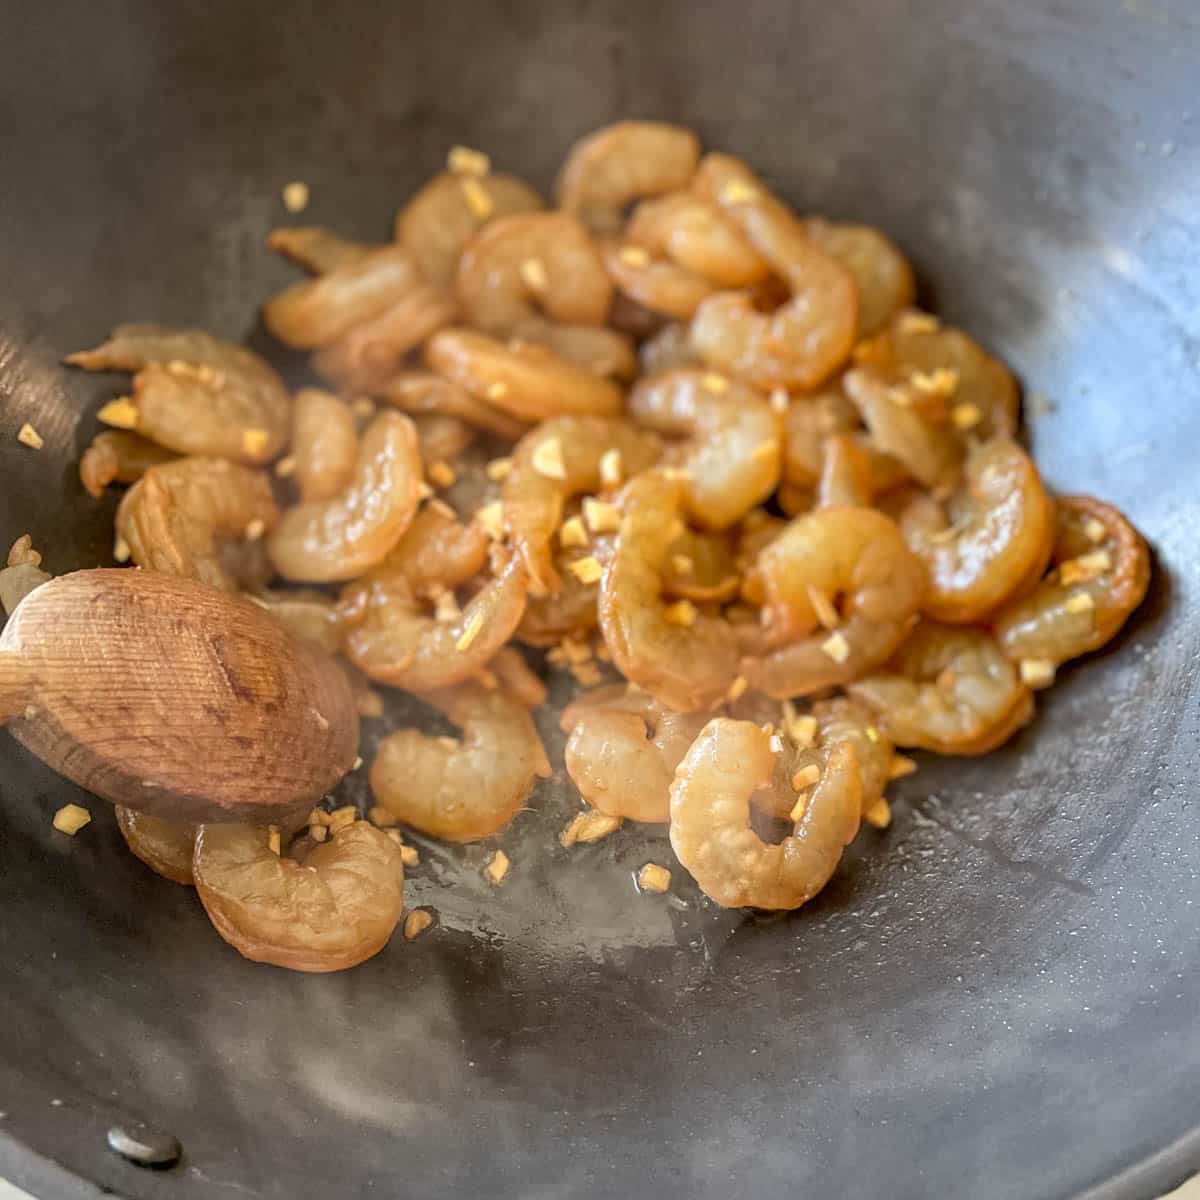 Marinated shrimp is cooked in a wok.